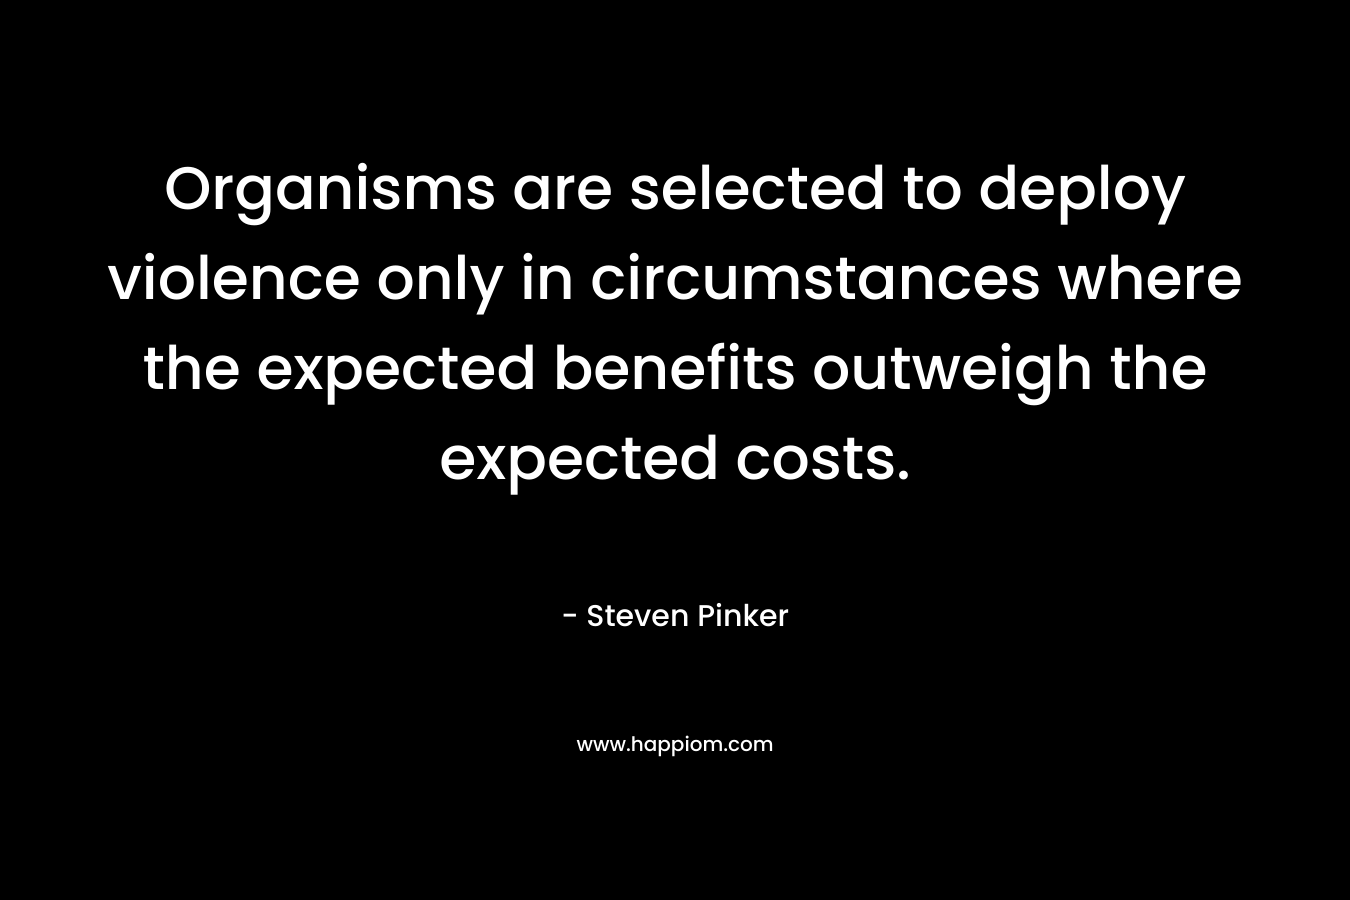 Organisms are selected to deploy violence only in circumstances where the expected benefits outweigh the expected costs. – Steven Pinker